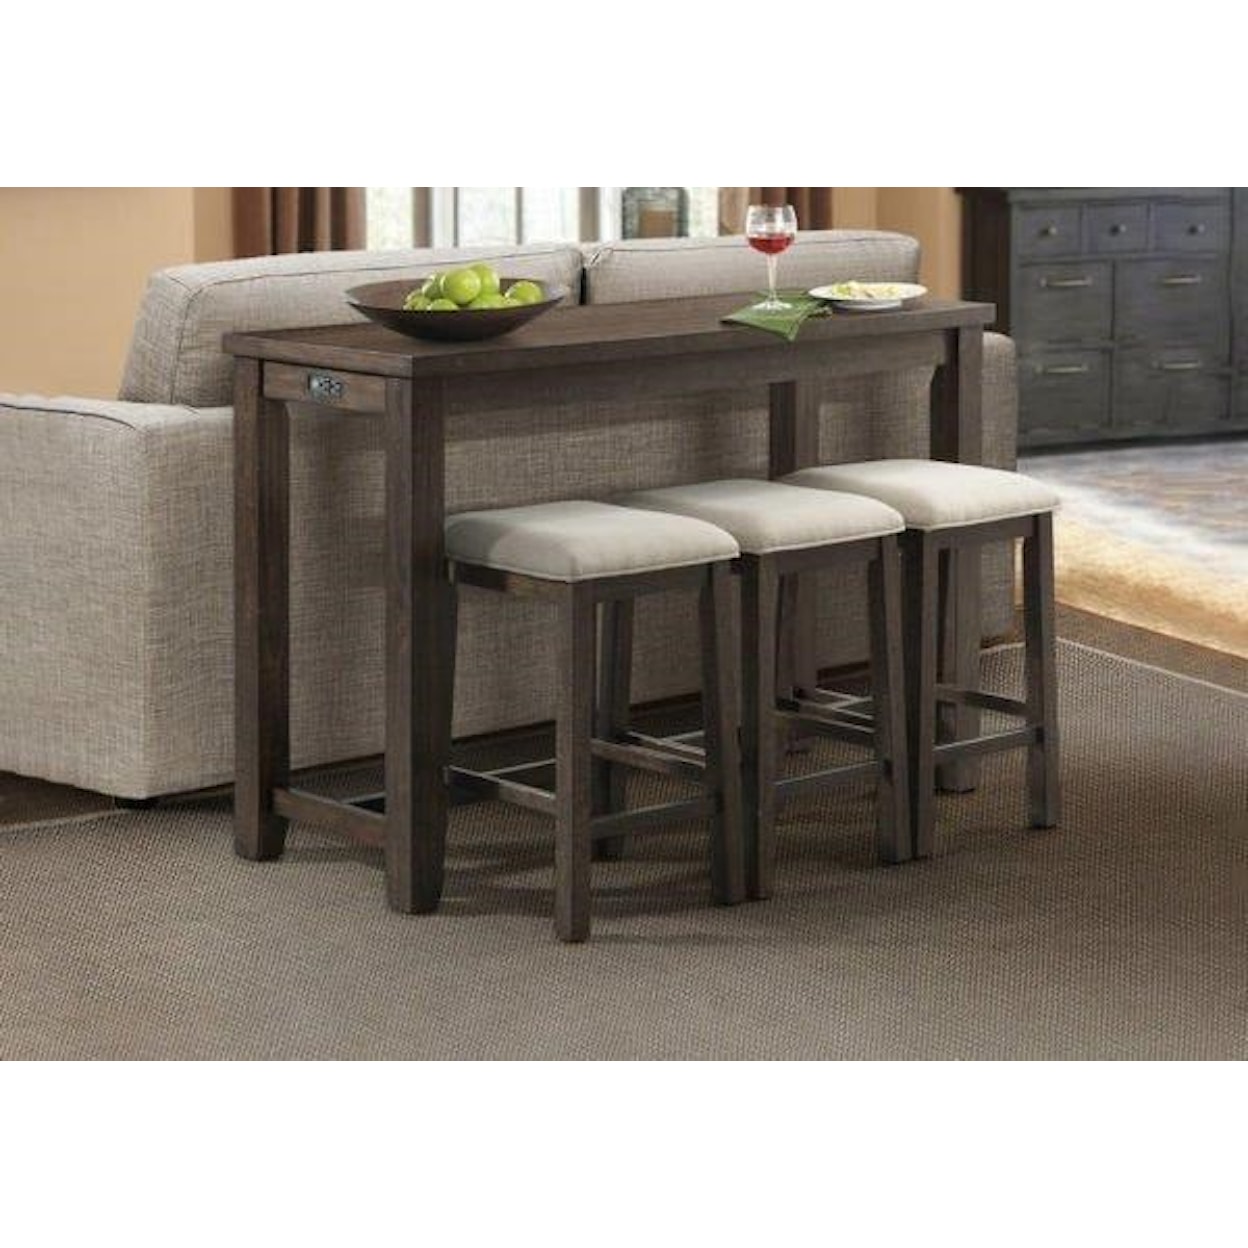 Elements International Stacey Stacey Console Set